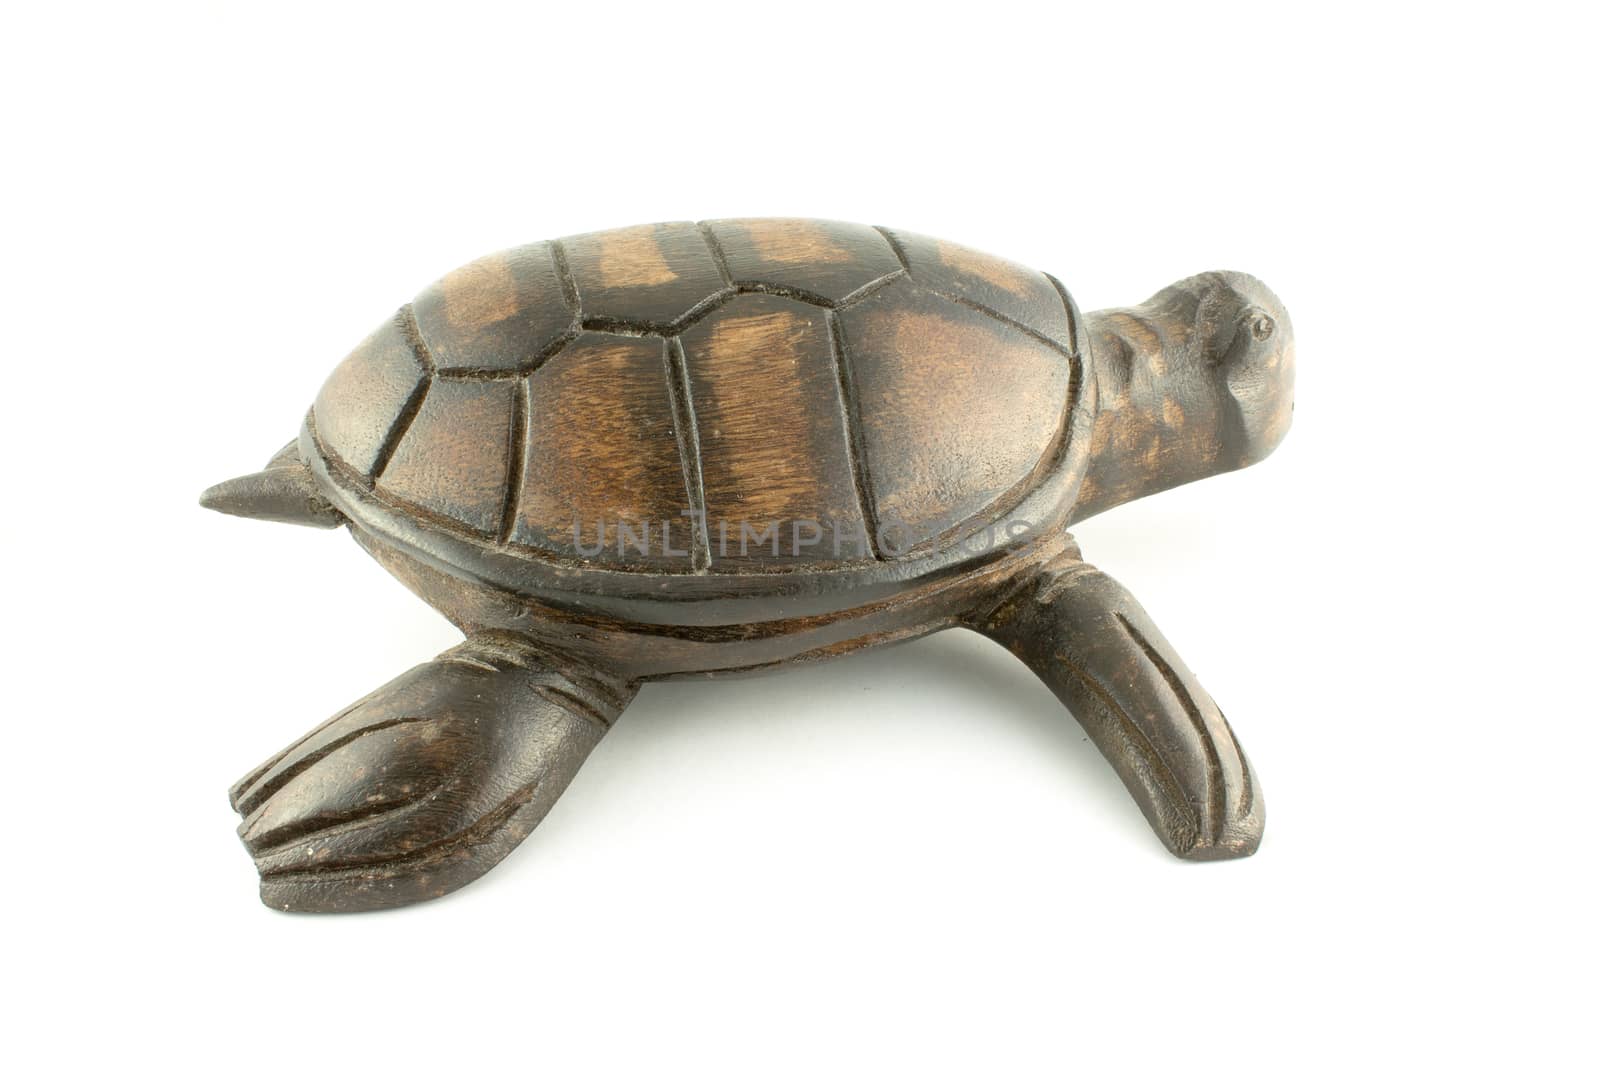 wooden turtle on a white background